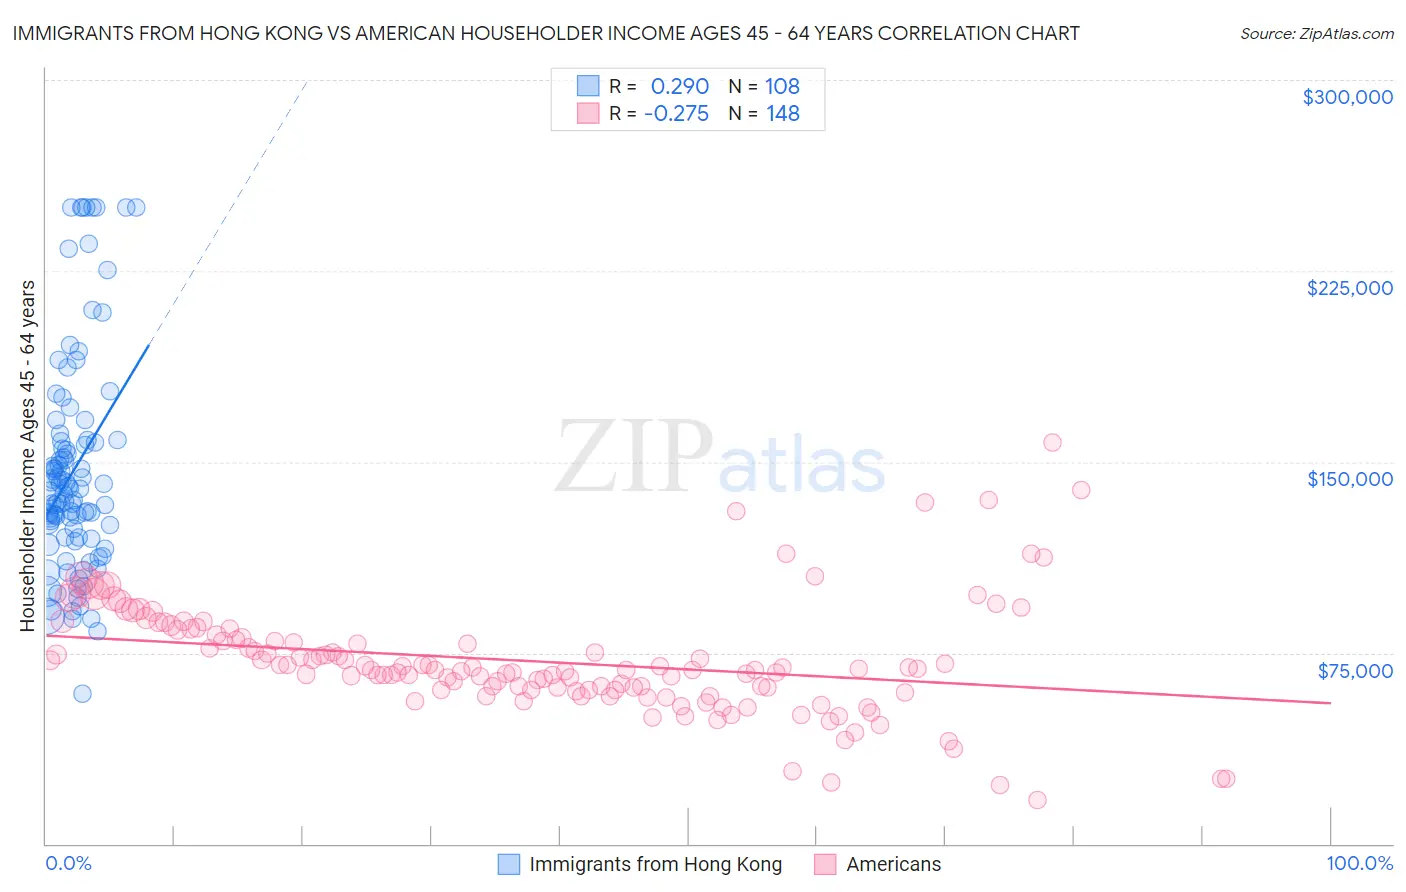 Immigrants from Hong Kong vs American Householder Income Ages 45 - 64 years